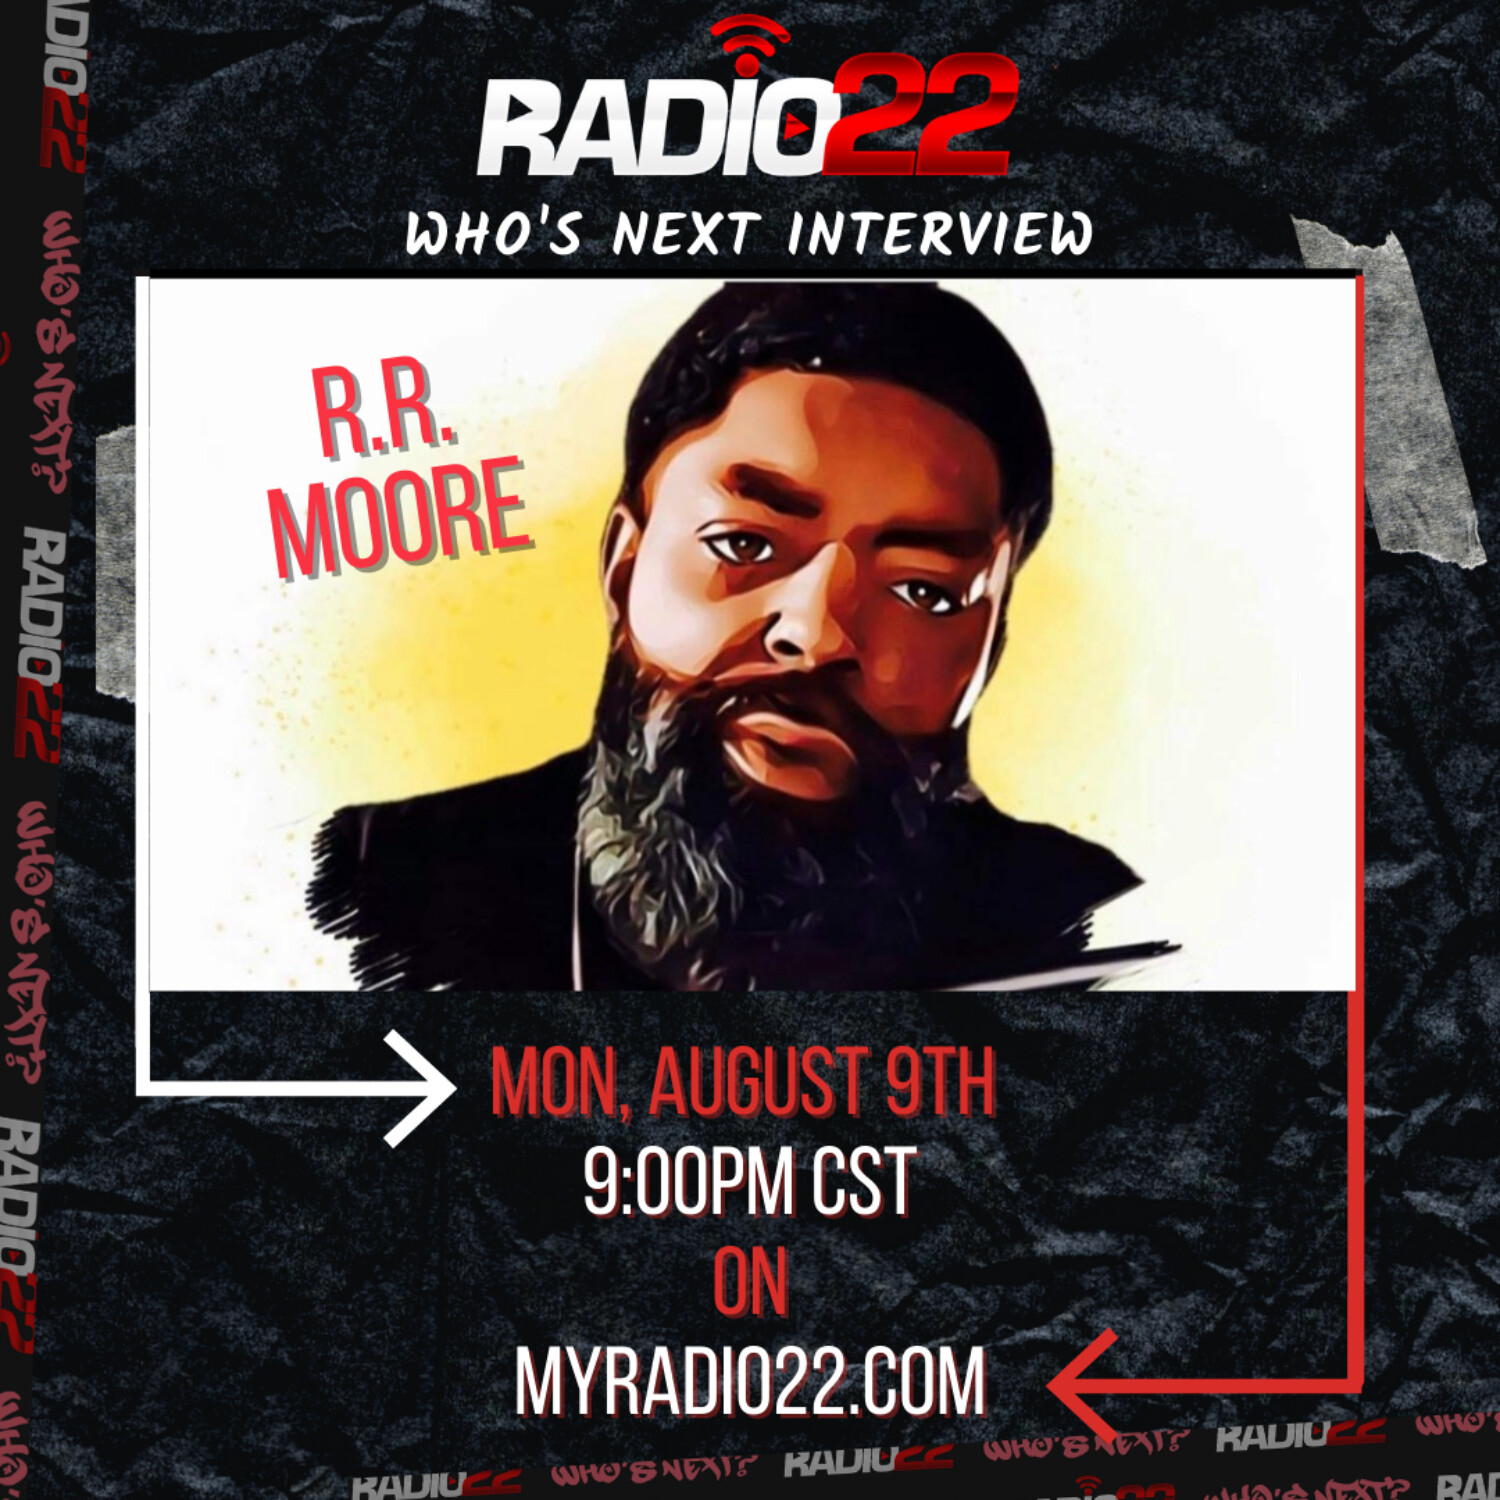 Who’s Next: R.R. Moore Interview